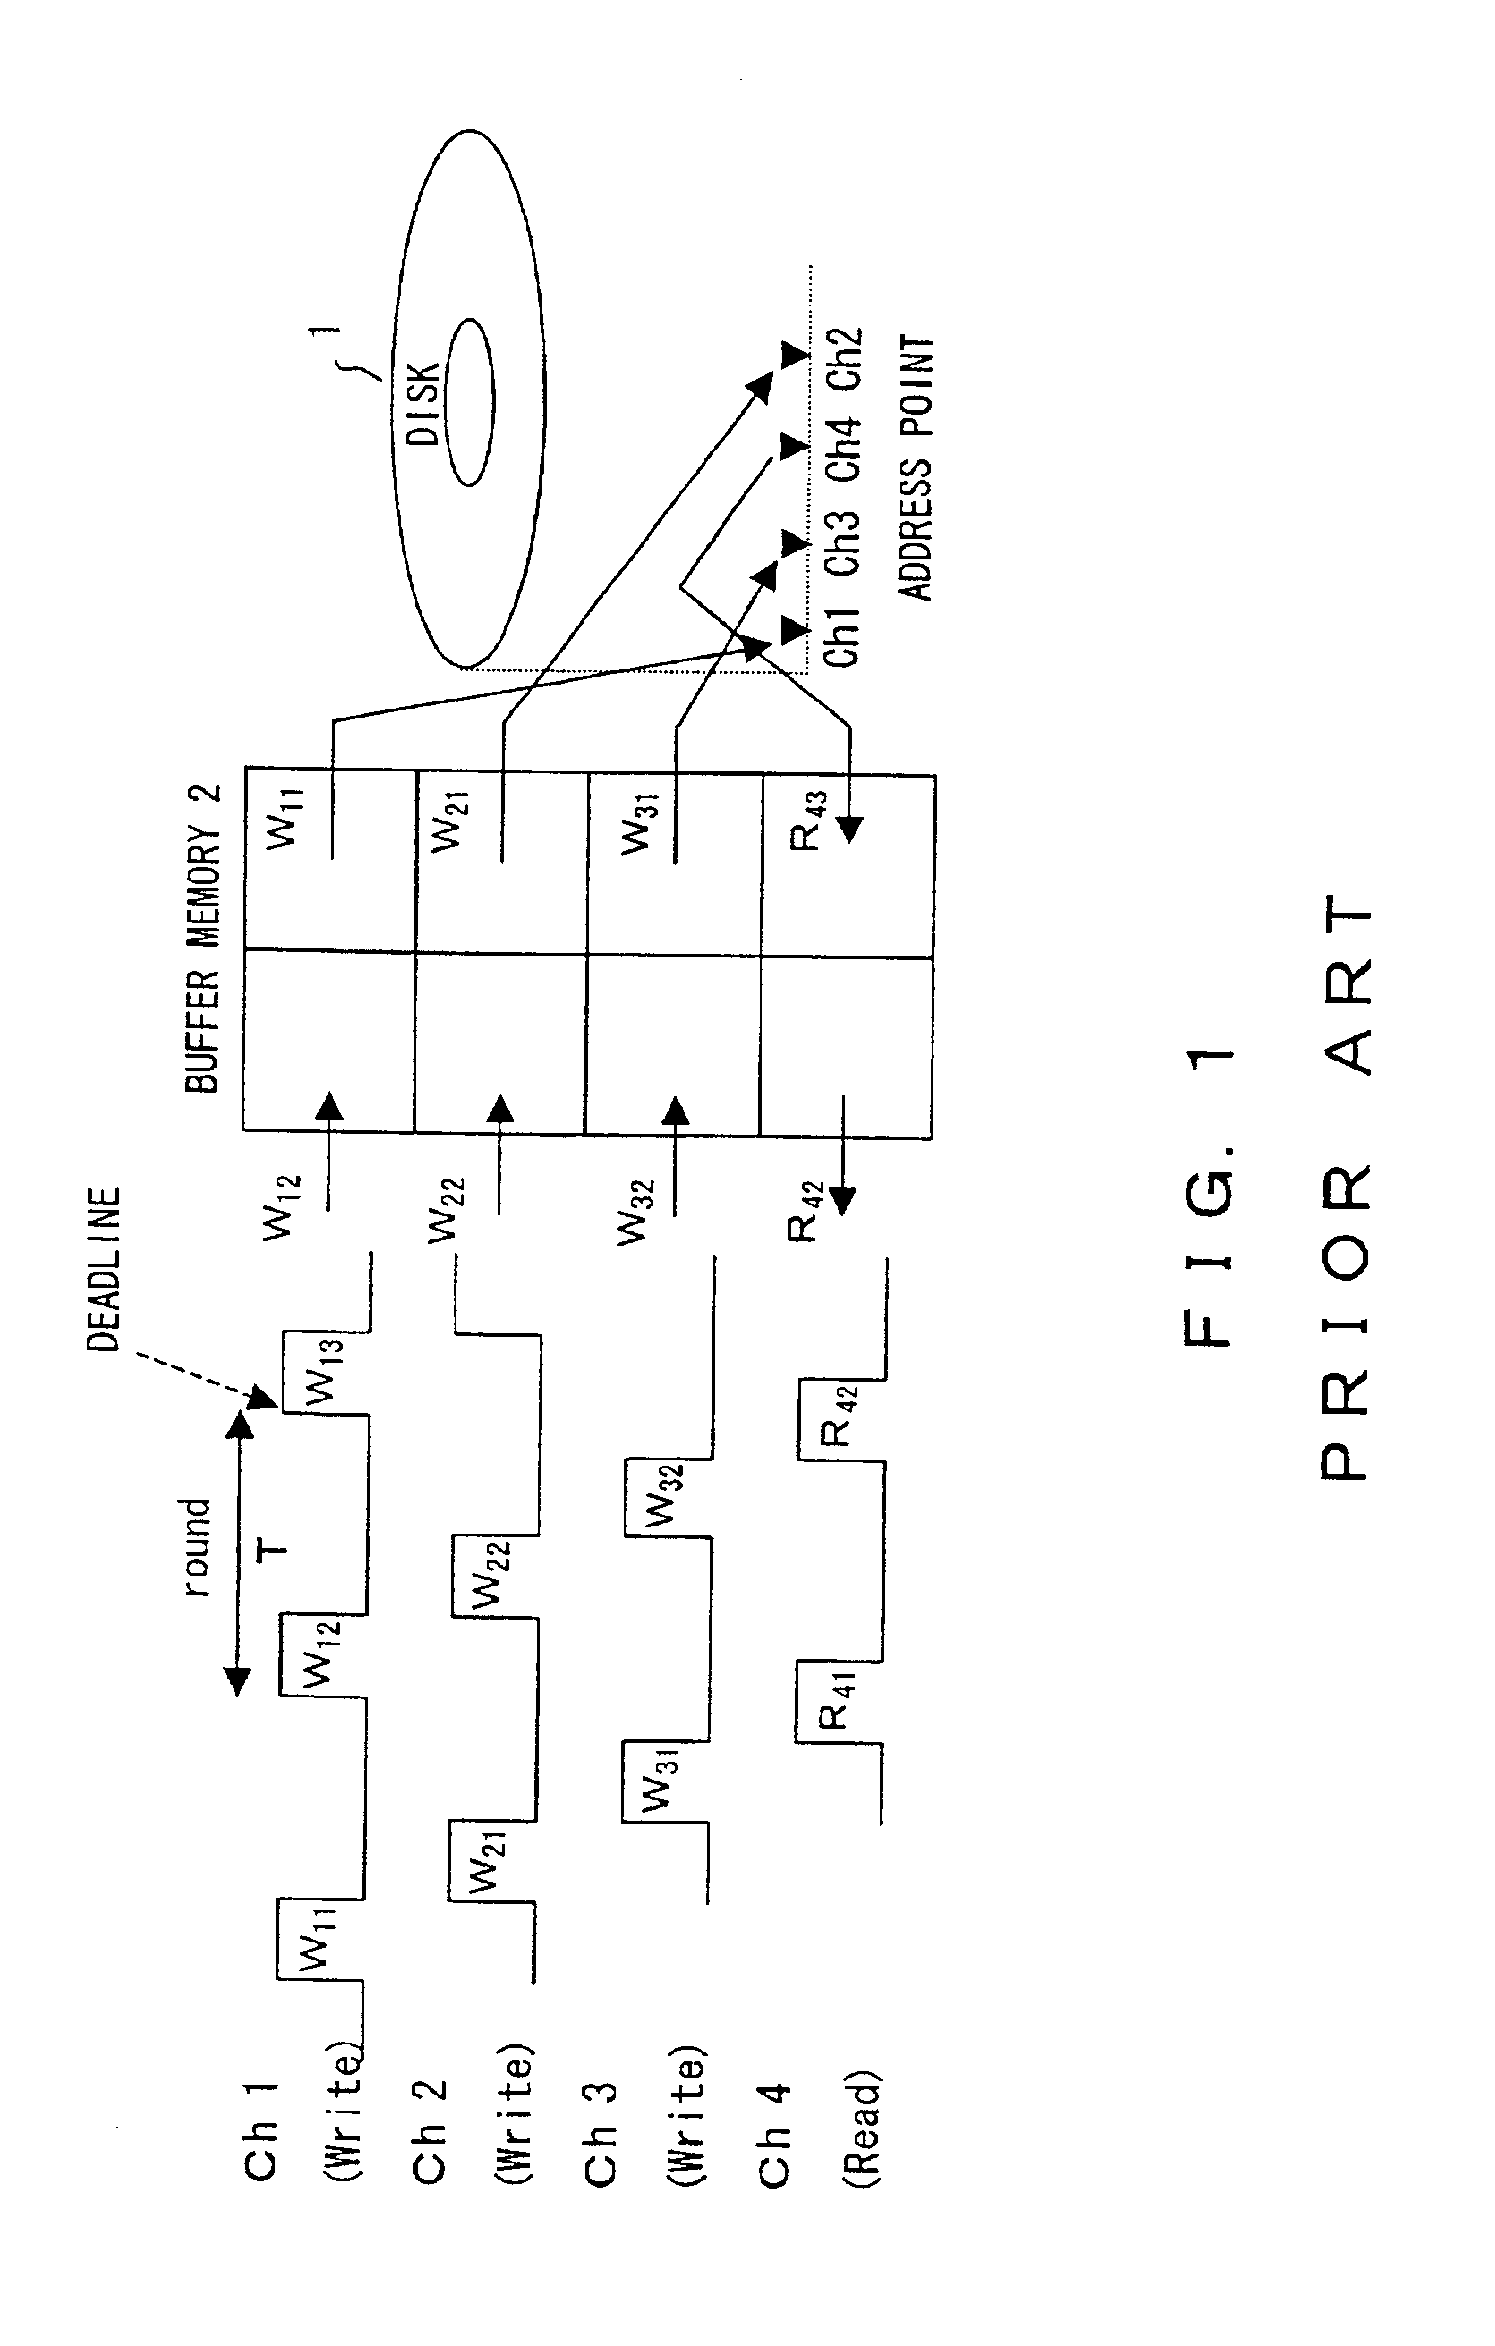 Access control apparatus and method for controlling access to storage medium